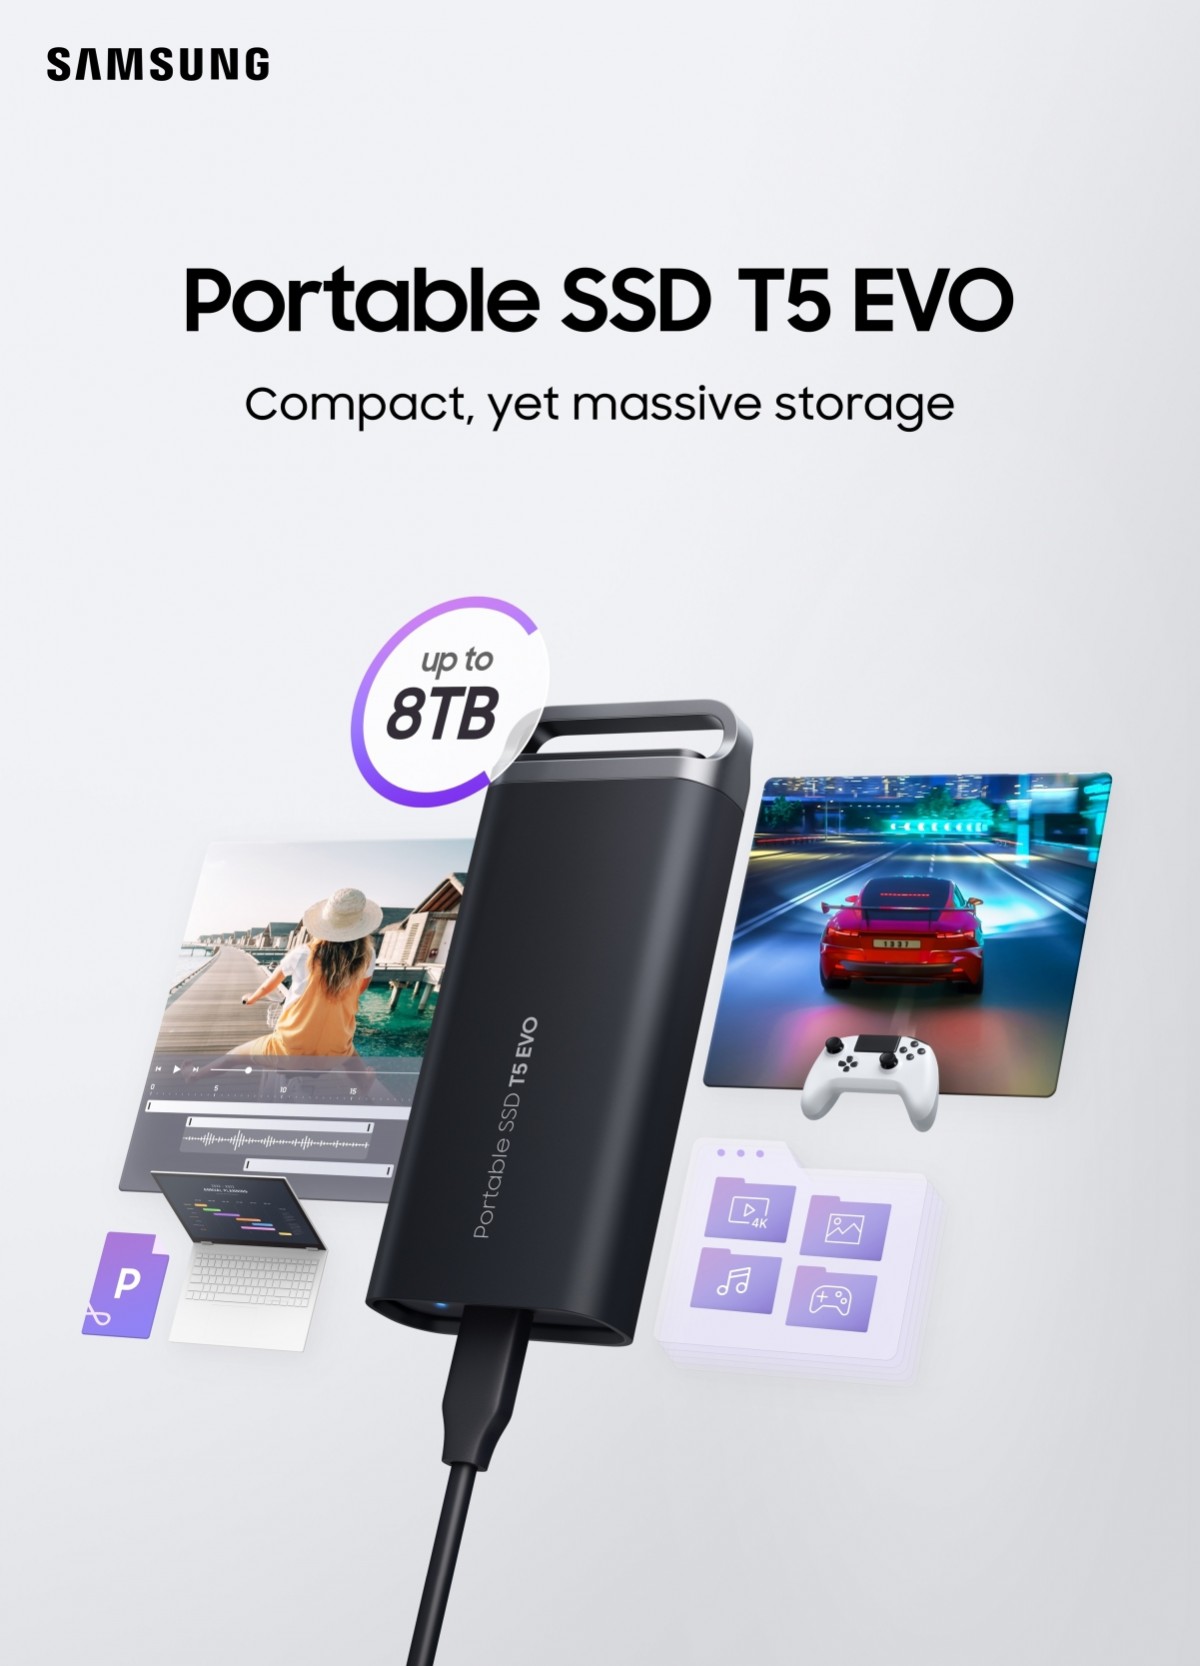 Samsung SSD T5 EVO arrives with 8 TB capacity